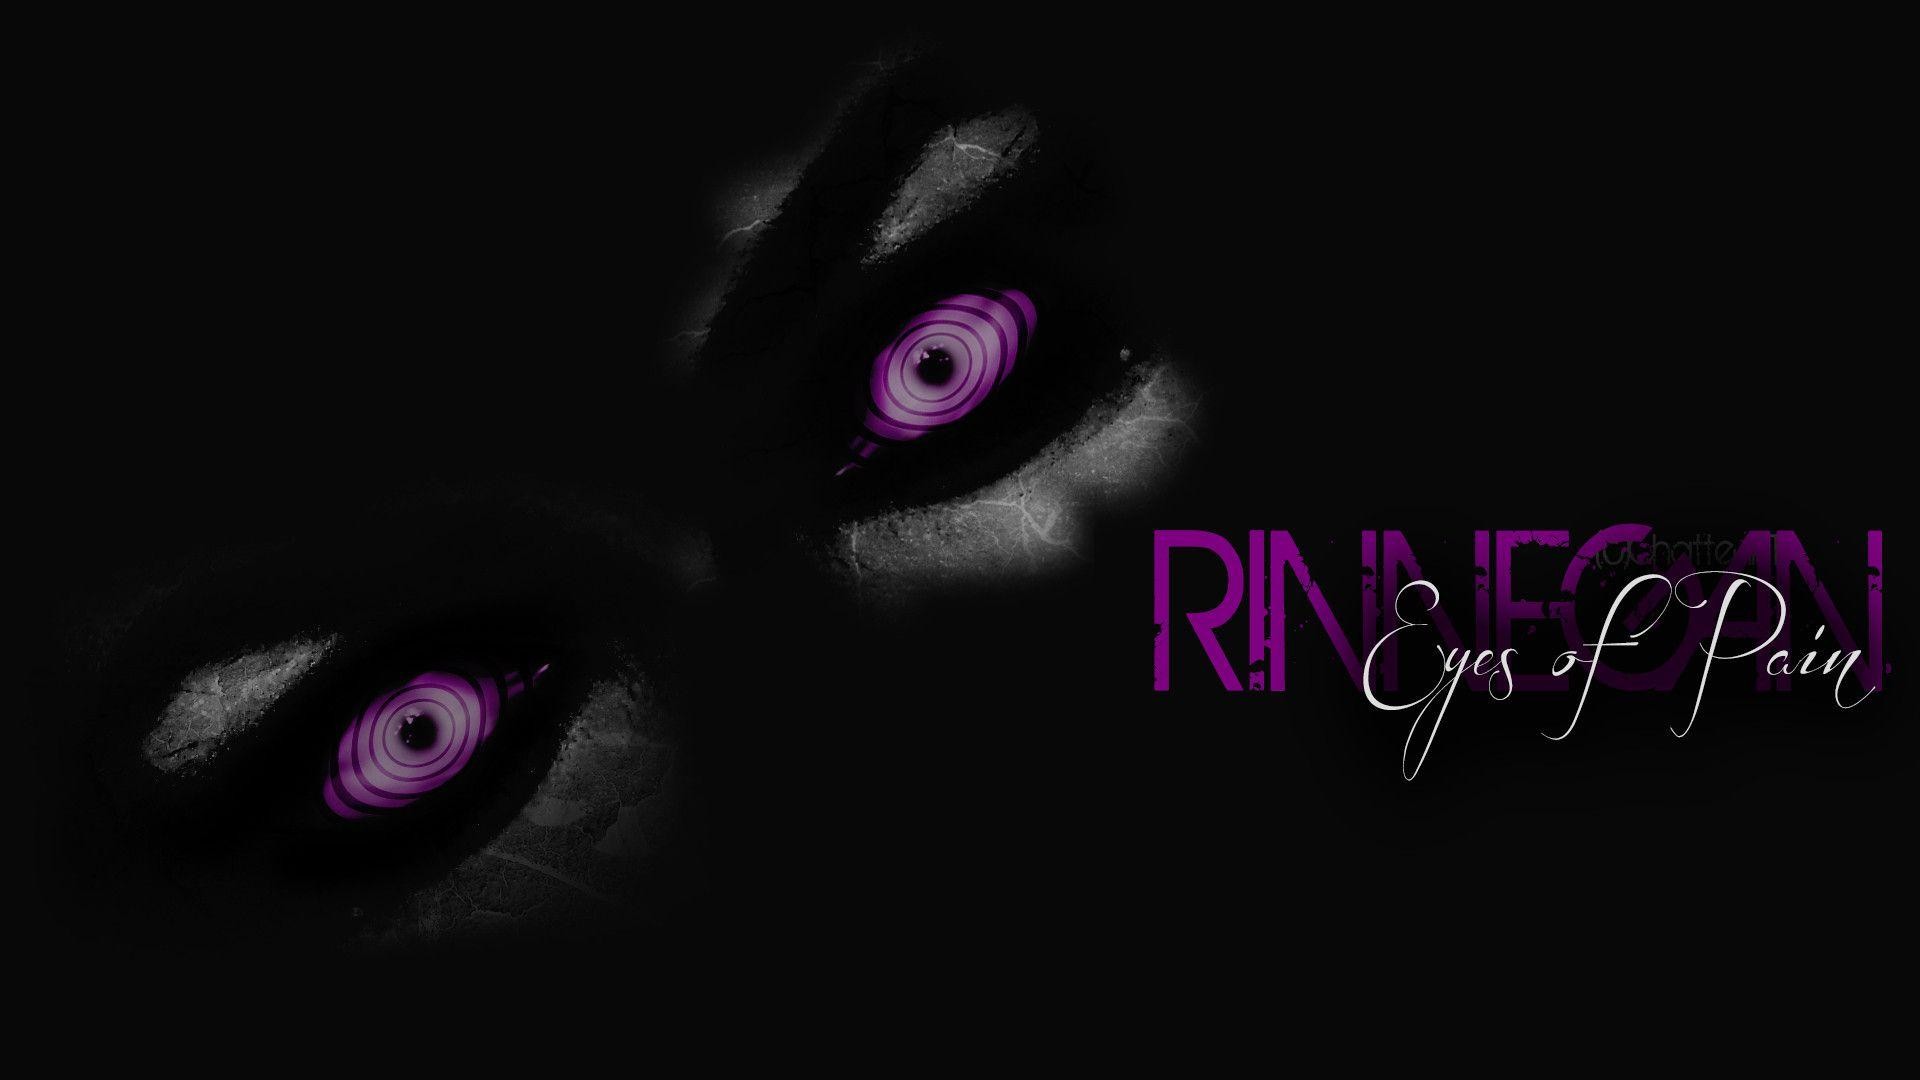 1920x1080 Rinnegan: Eyes of Pain by ChatteArt on DeviantArt